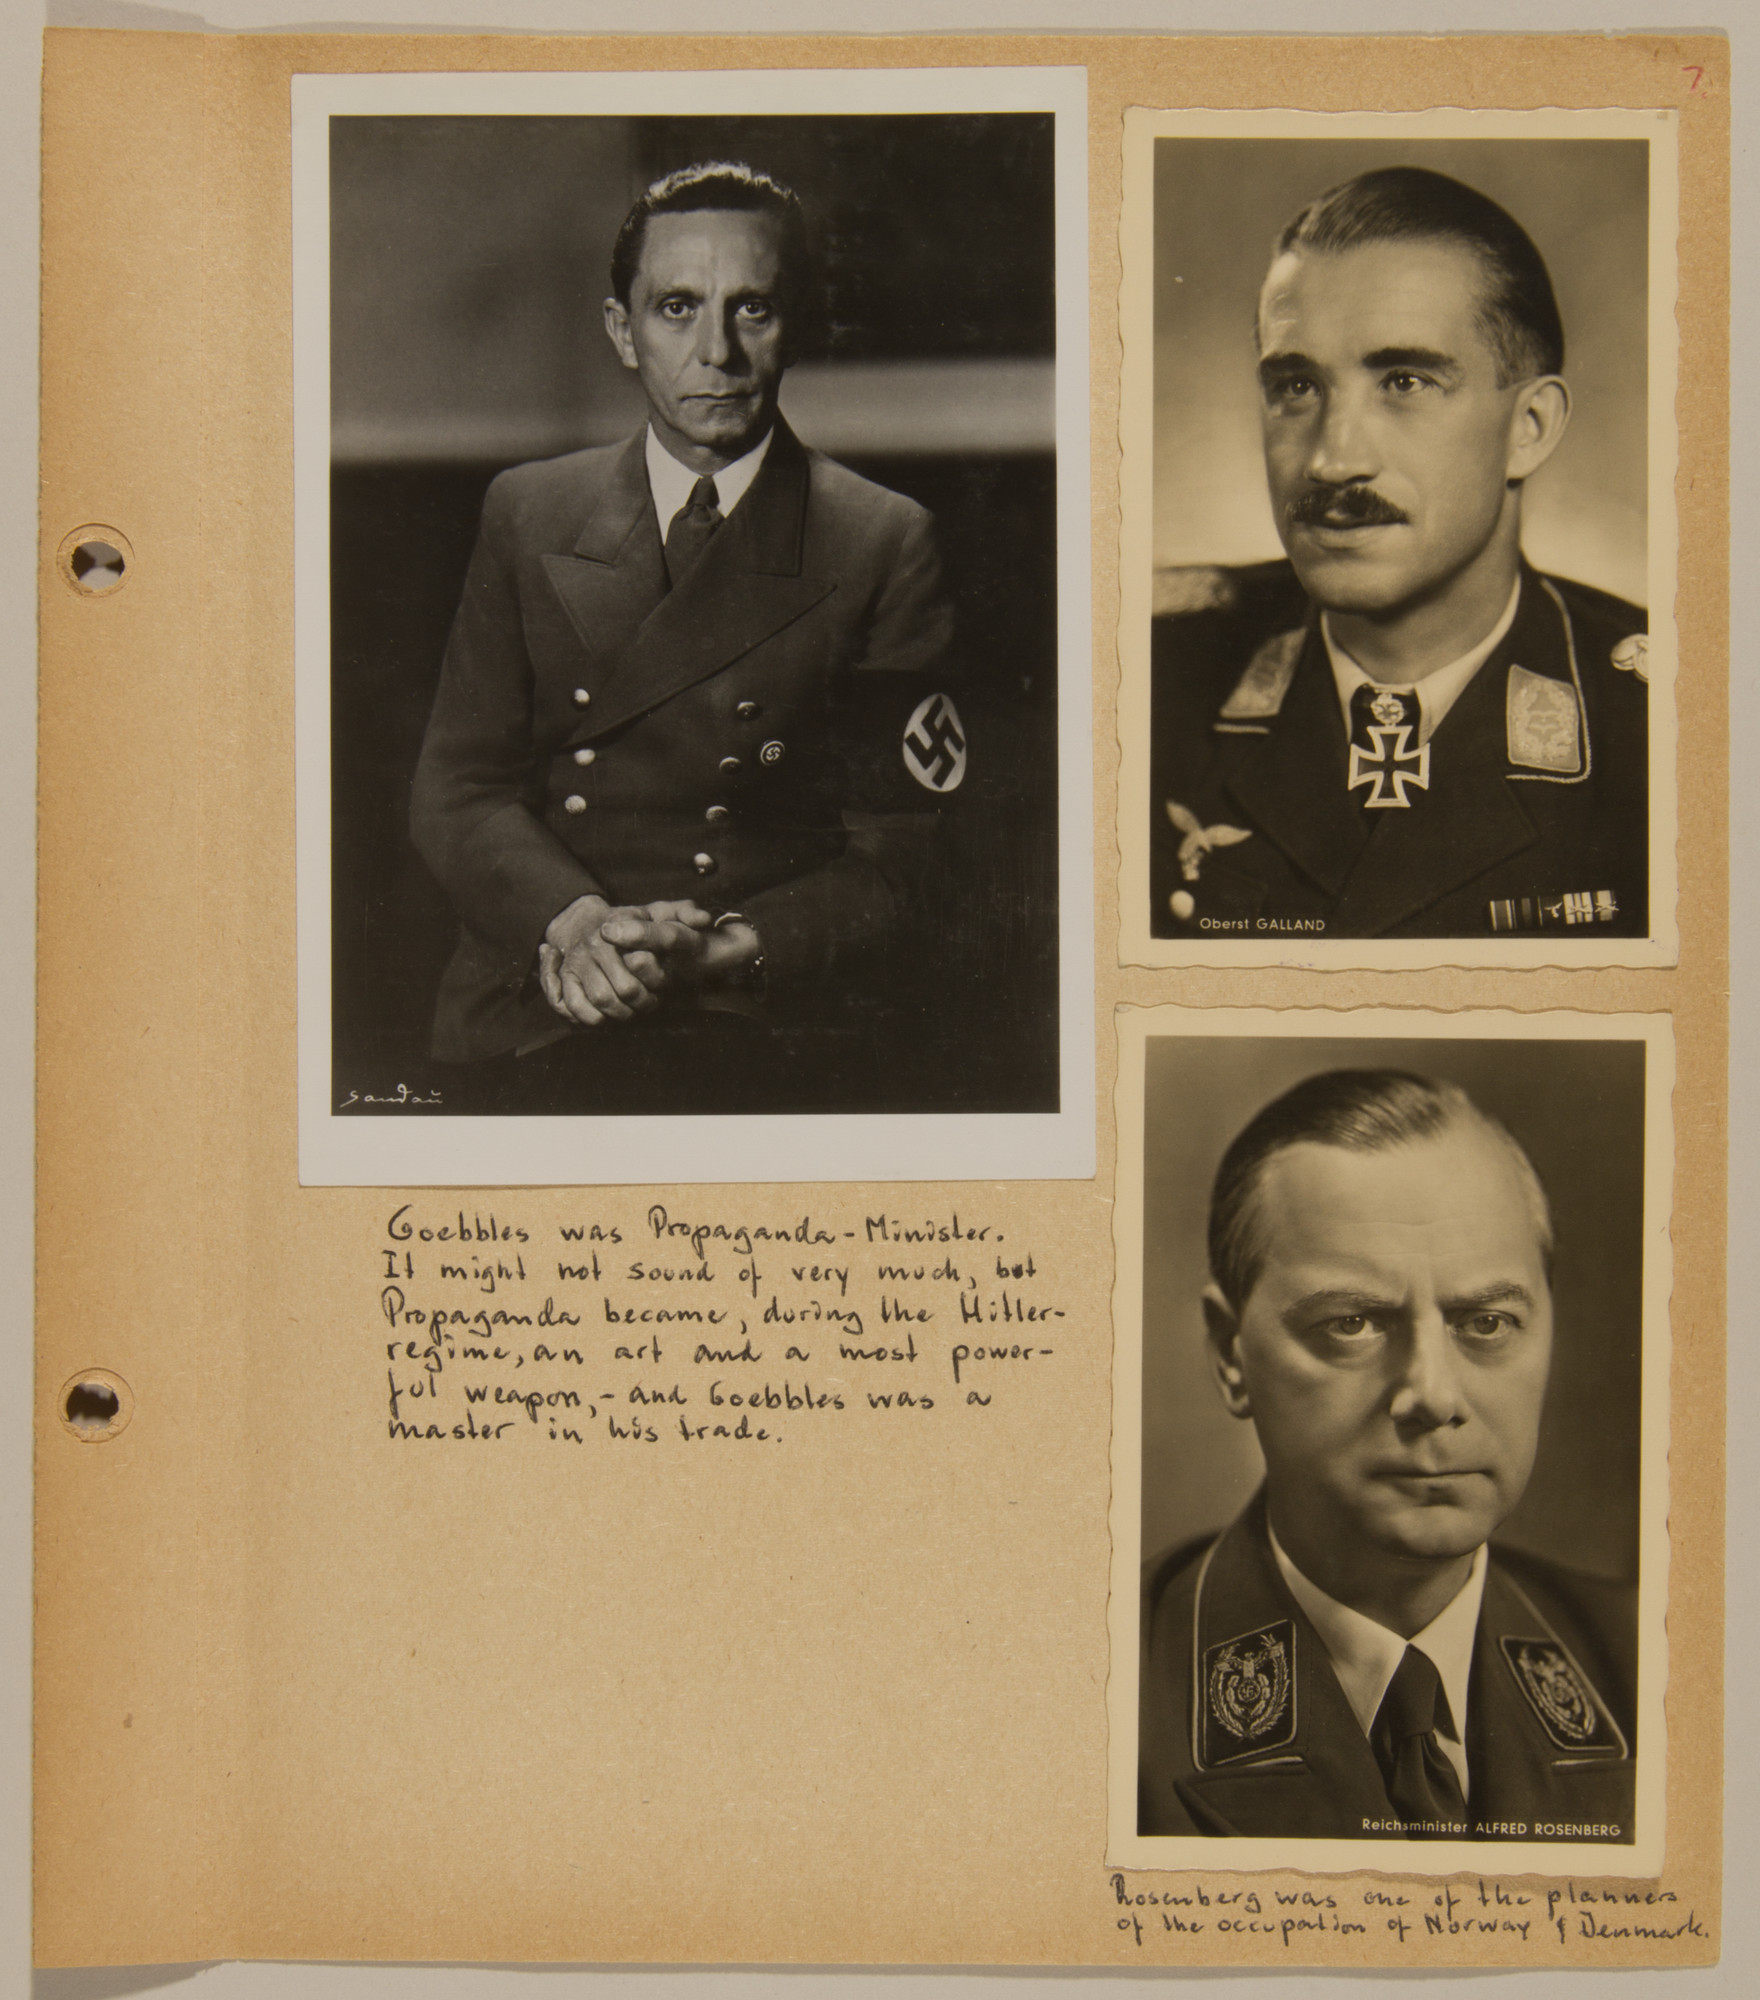 Page from volume four of a set of scrapbooks compiled by Bjorn Sibbern, a Danish policeman and resistance member, documenting the German occupation of Denmark.

This page contains photographs of Goebbels, Galland and Alfred Rosenberg.